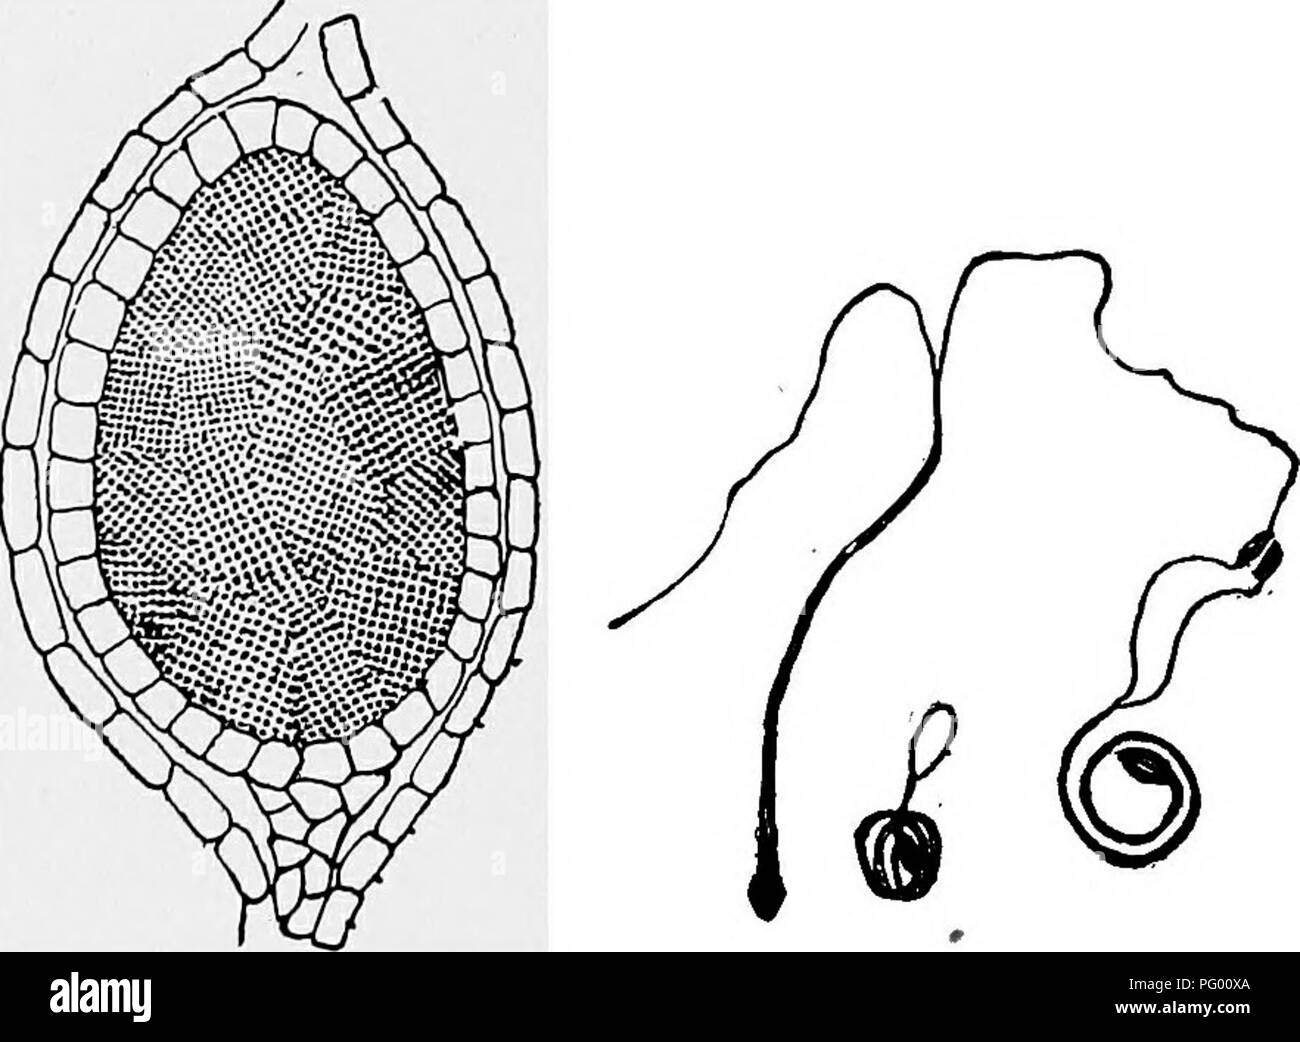 . Lessons in botany. Botany. F,g. i 9. Section of antheridial receptacle from male plant of Marchantia polymorpha, showing cavities where the antheridia are borne. 237. Archegonial plants.—In fig. 122 we see one of the female plants of marchantia. Upon this there are also very curious structures, which remind one of miniature umbrellas.. Fig. 120. Section of antheridium of mar- chantia, showing the groups of sperm mother cells. Fig. 121. Spermatozoids of marchantia, uncoiling and one extended, showing the two cilia. The general plan of the archegonial receptacle is similar to that 01 the anthe Stock Photo